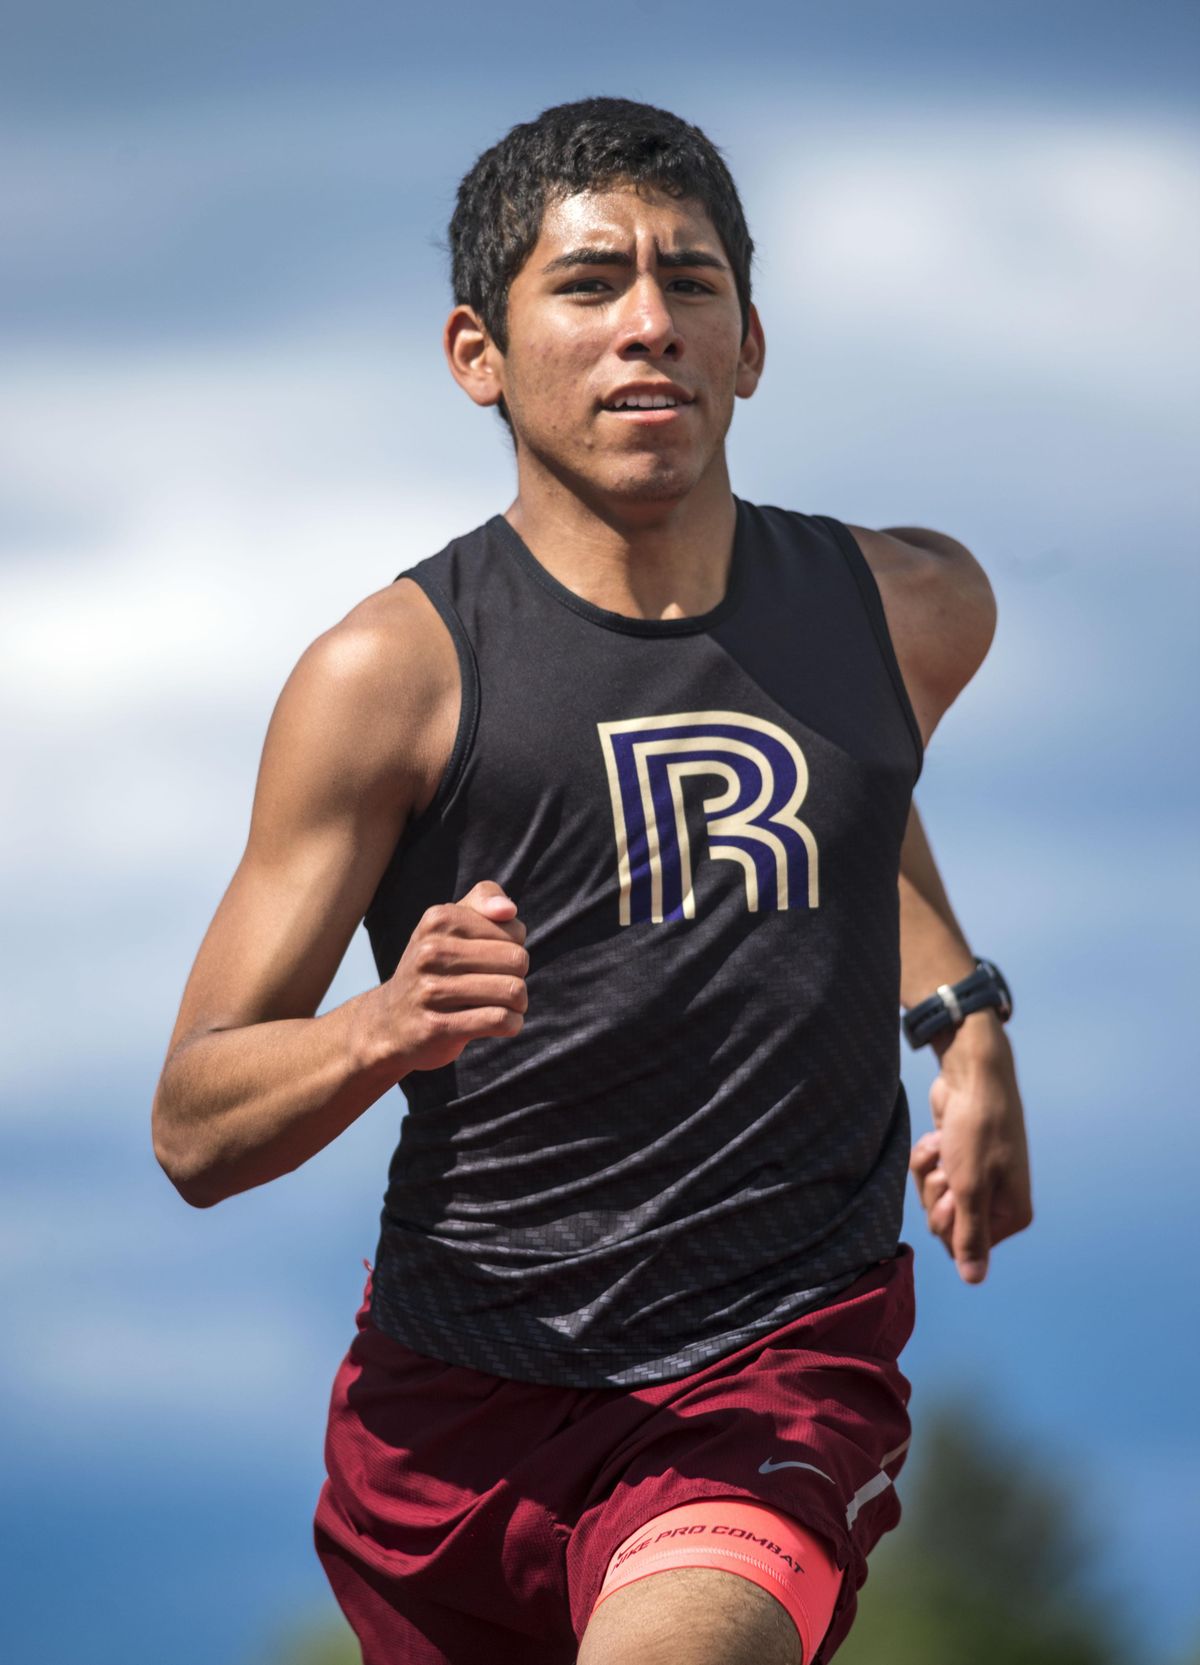 Rogers High School honor student and distance runner Roberto Lopez also works 30 hours a week at McDonald